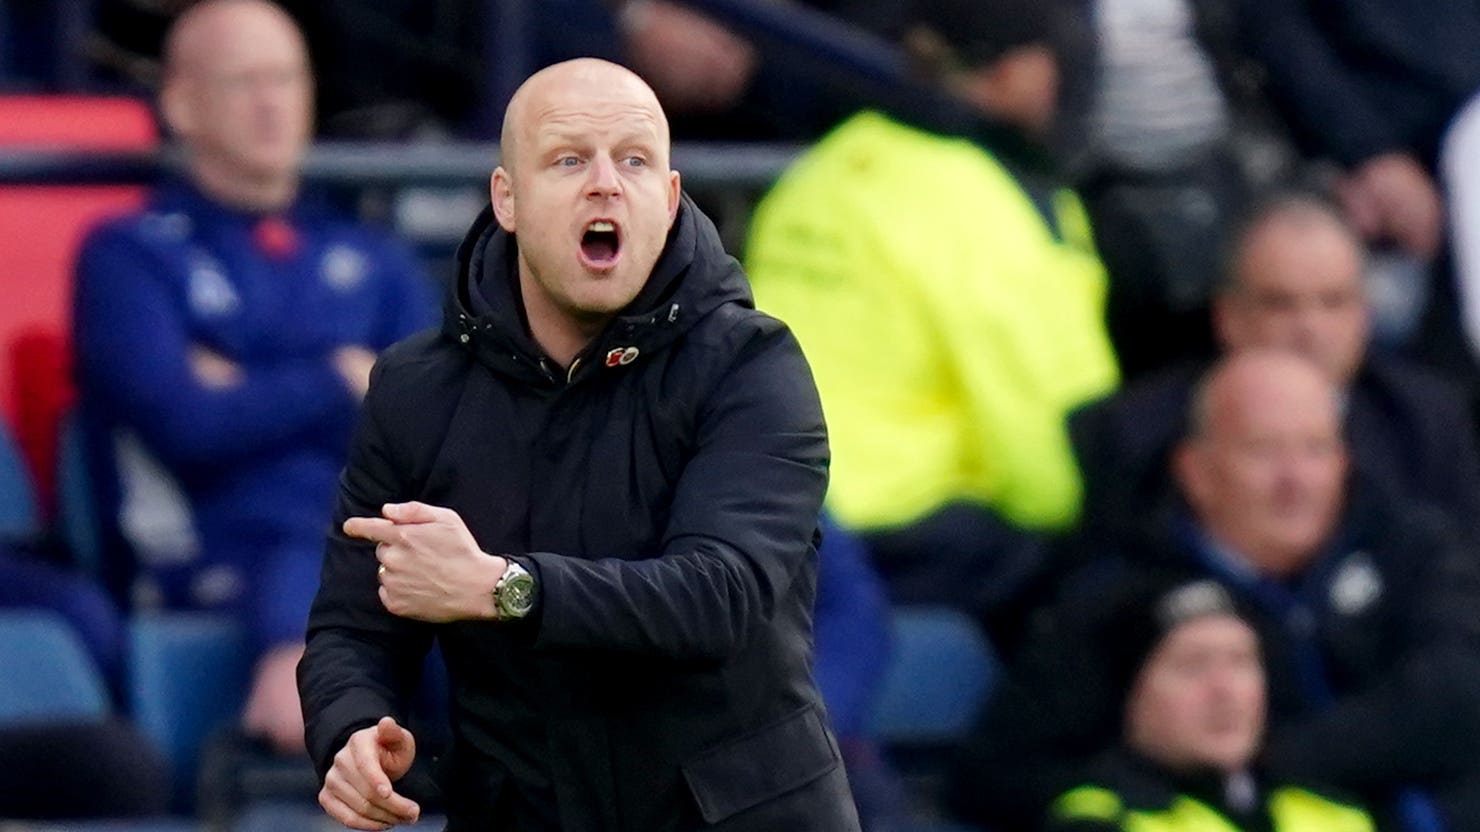 Steven Naismith confident in what he is doing at Hearts